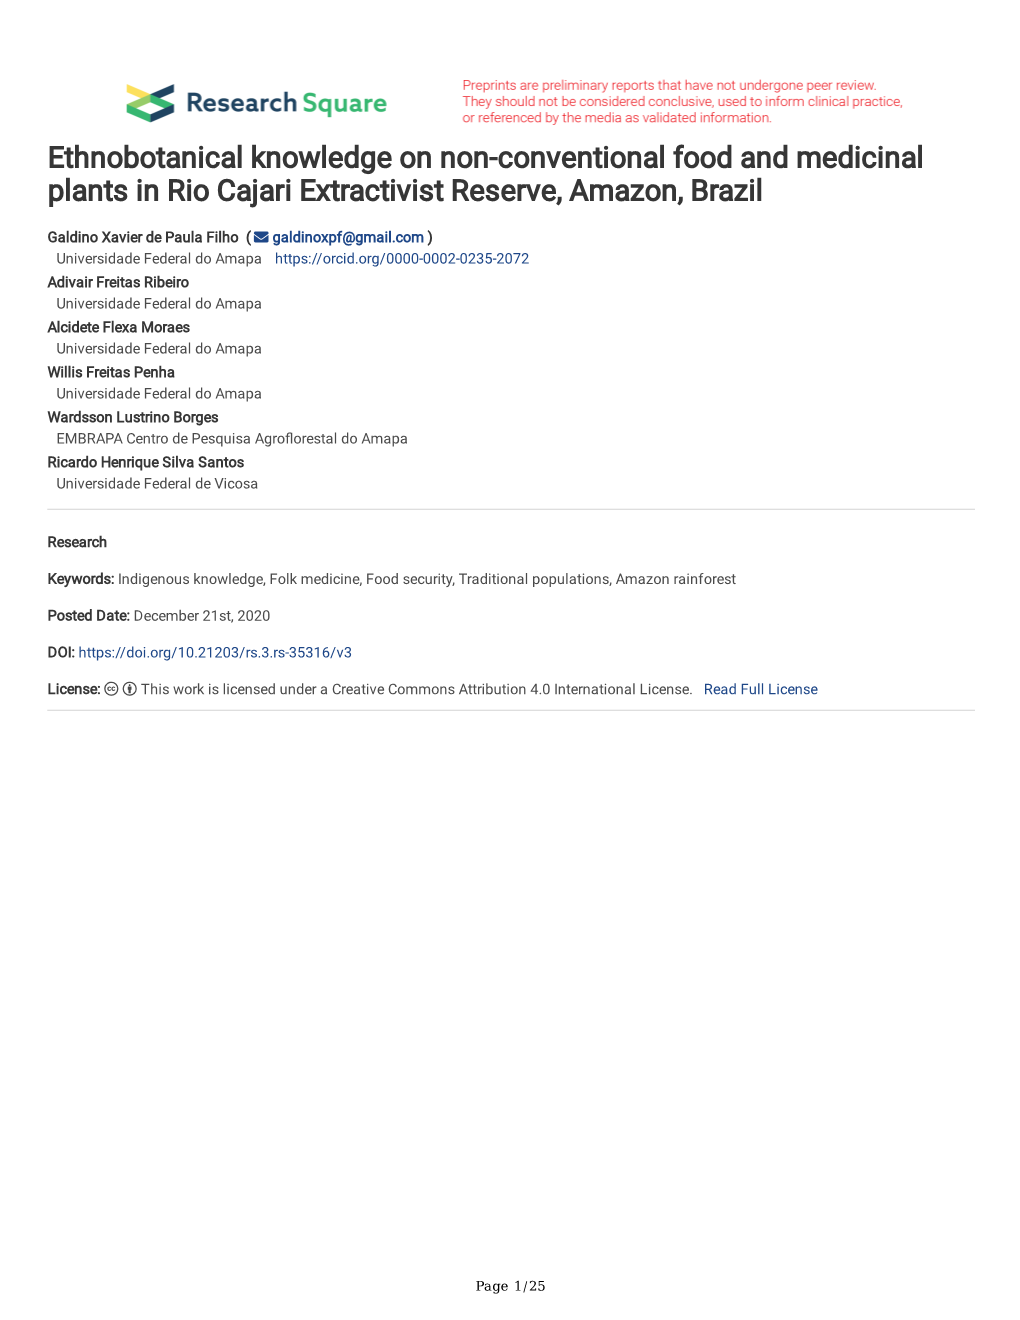 Ethnobotanical Knowledge on Non-Conventional Food and Medicinal Plants in Rio Cajari Extractivist Reserve, Amazon, Brazil